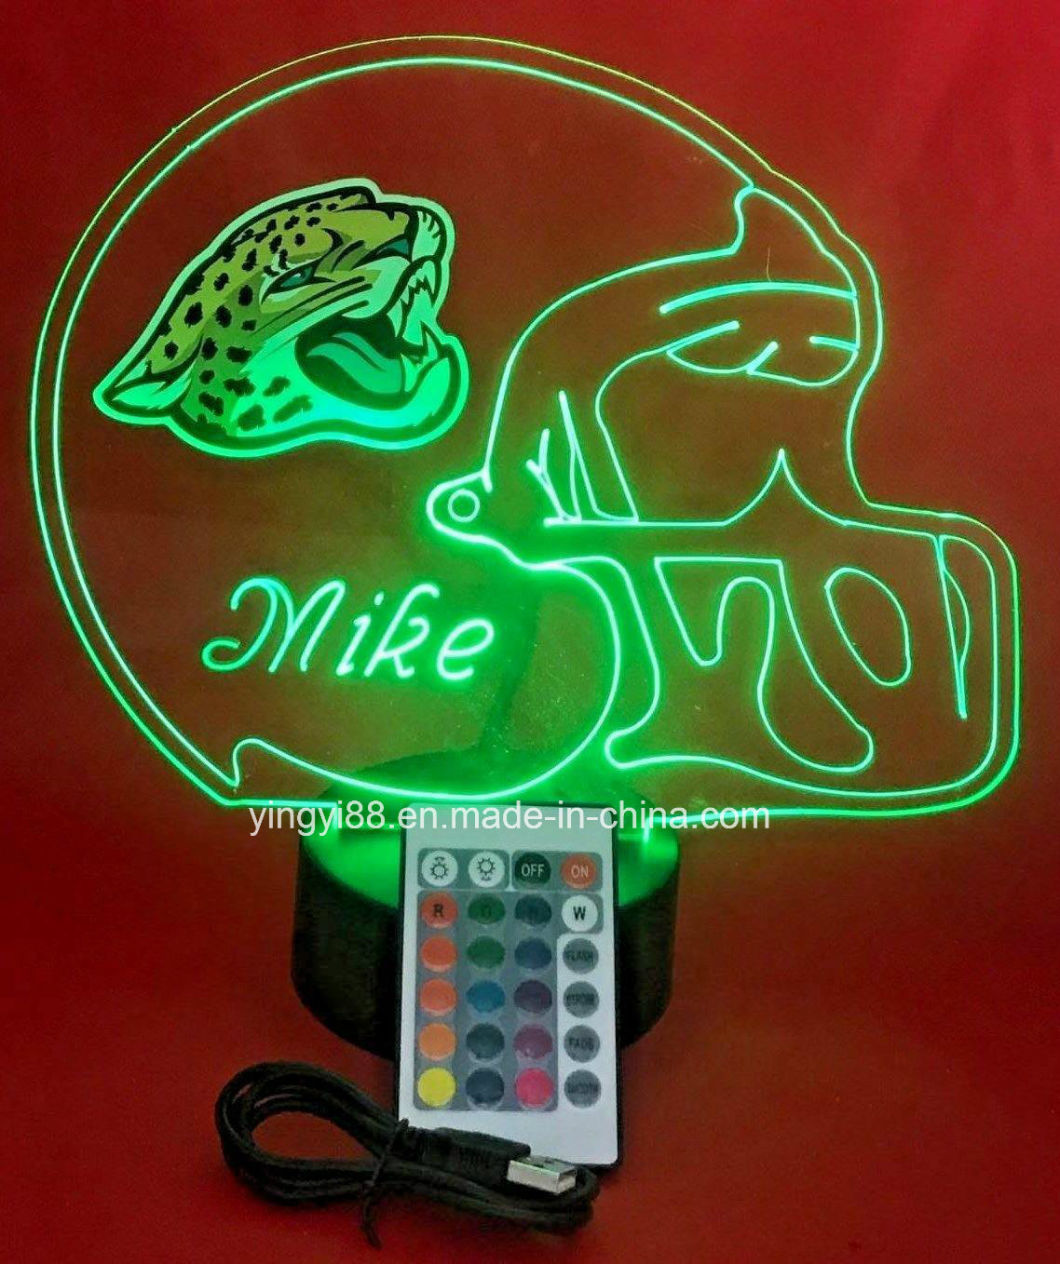 New Custom Made Football Light up Lamp LED Remote Personalized Free